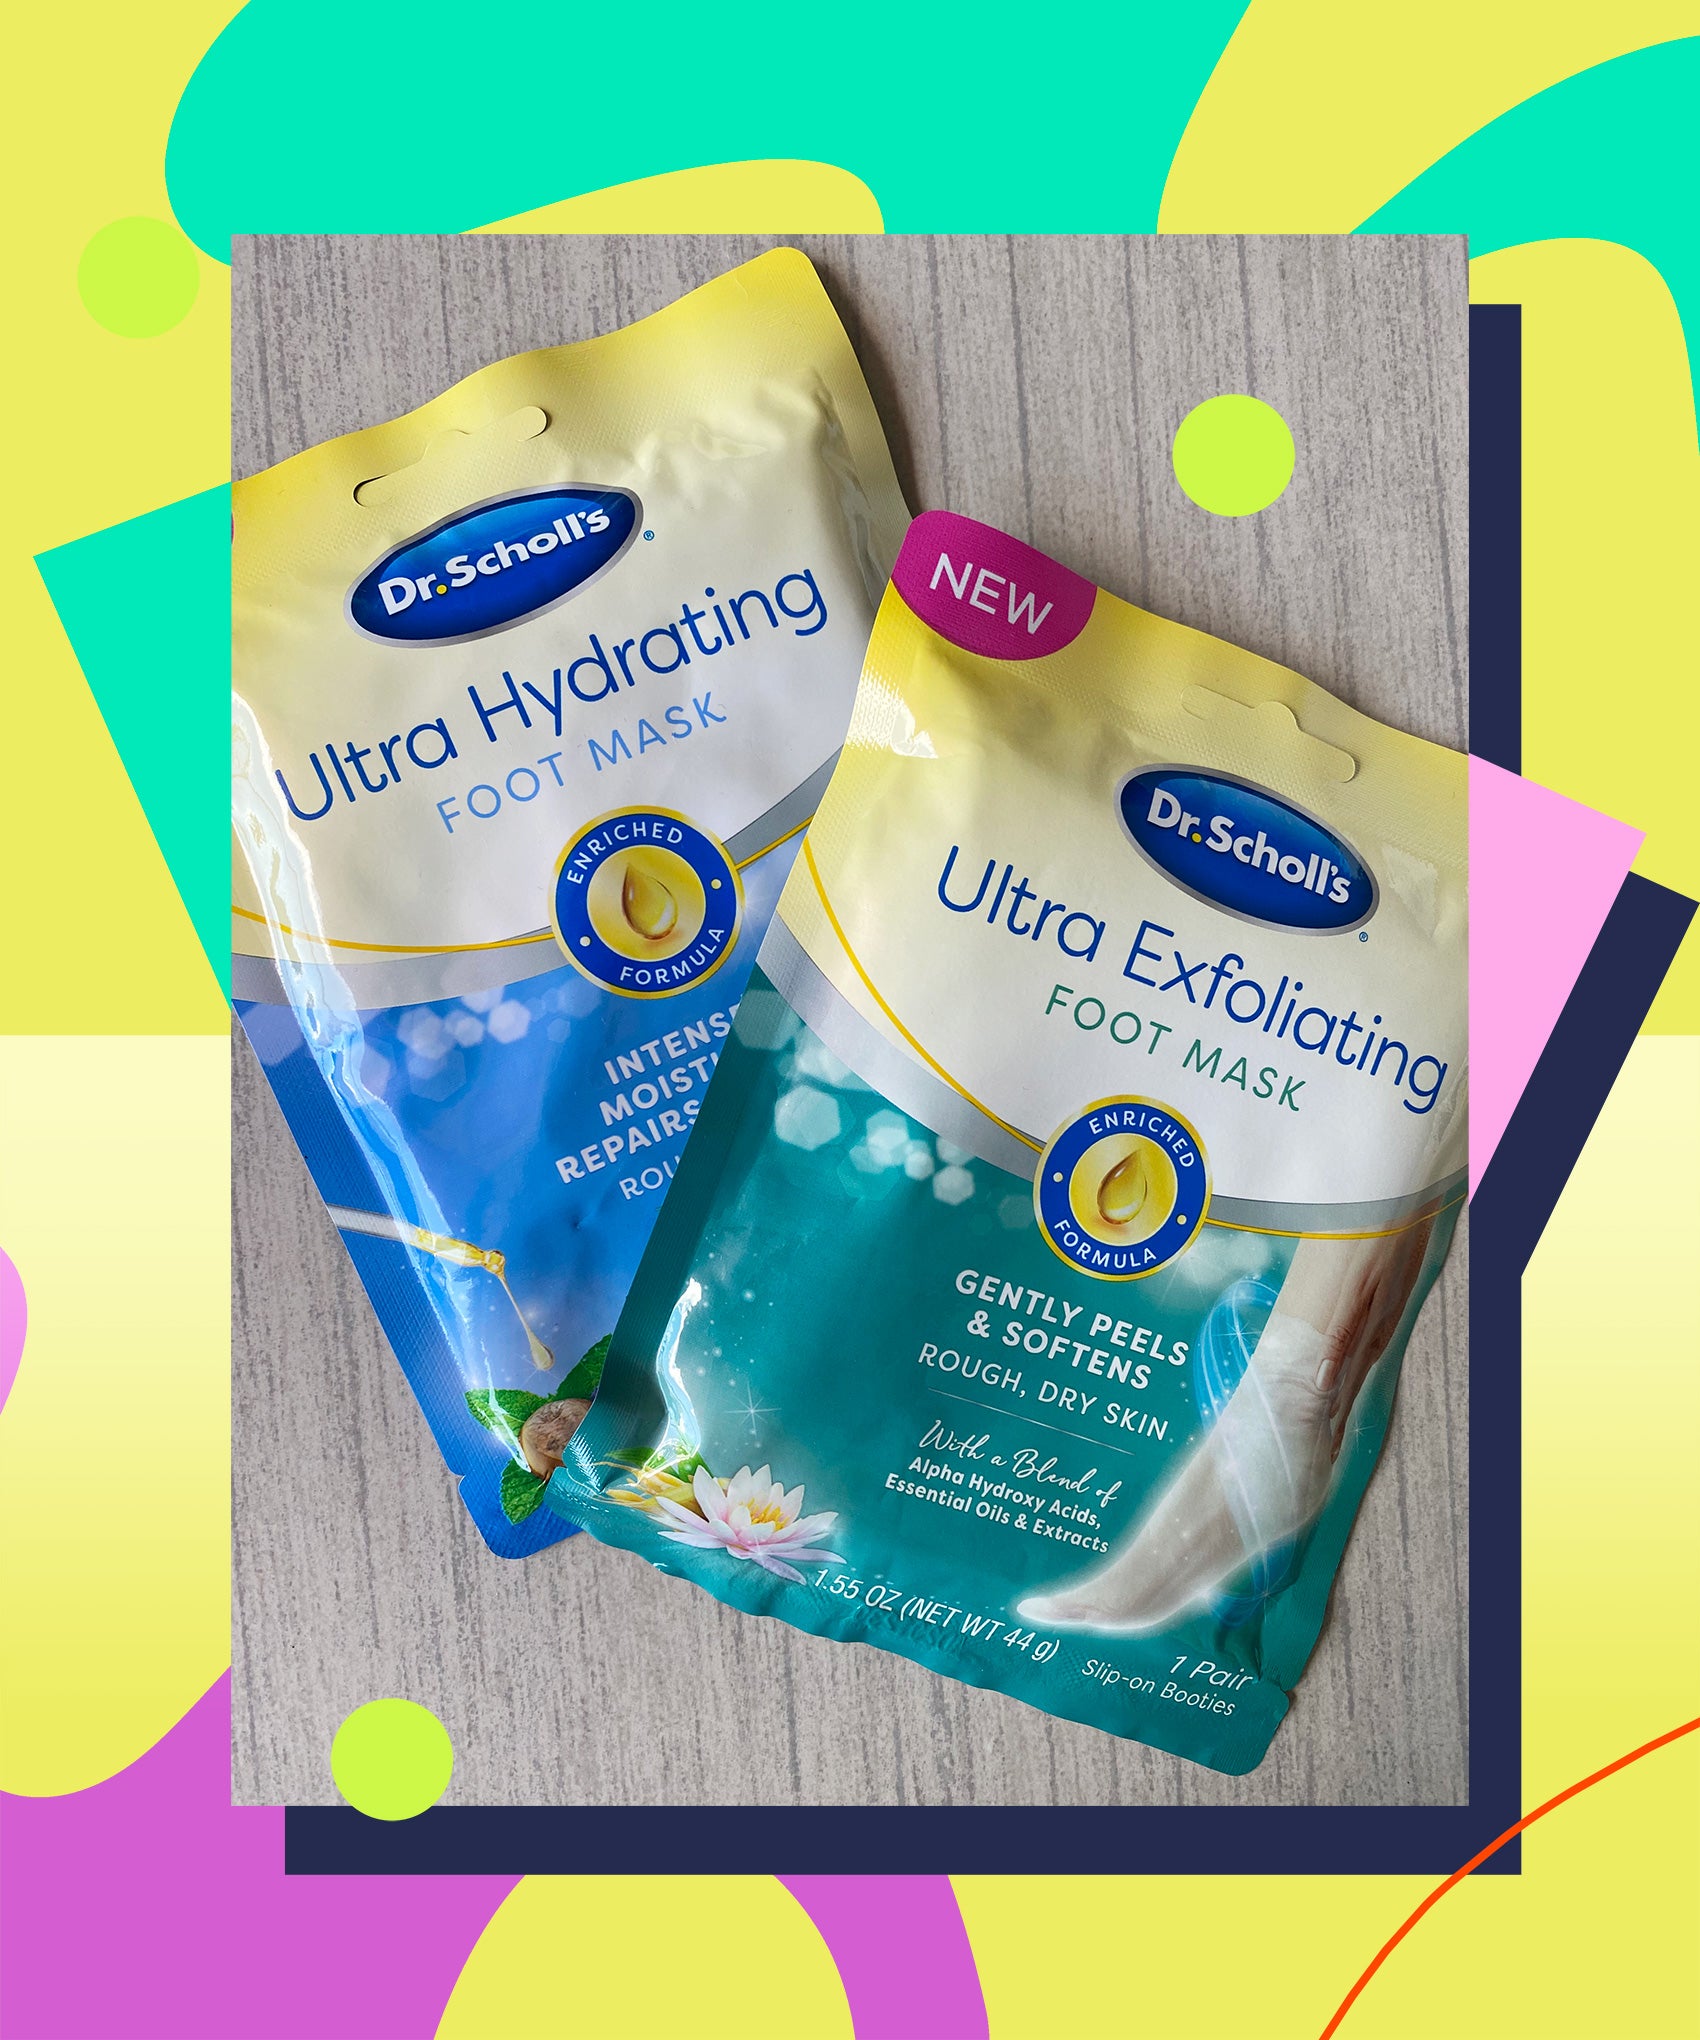  Dr. Scholl's Rough, Dry Skin Ultra Exfoliating Foot